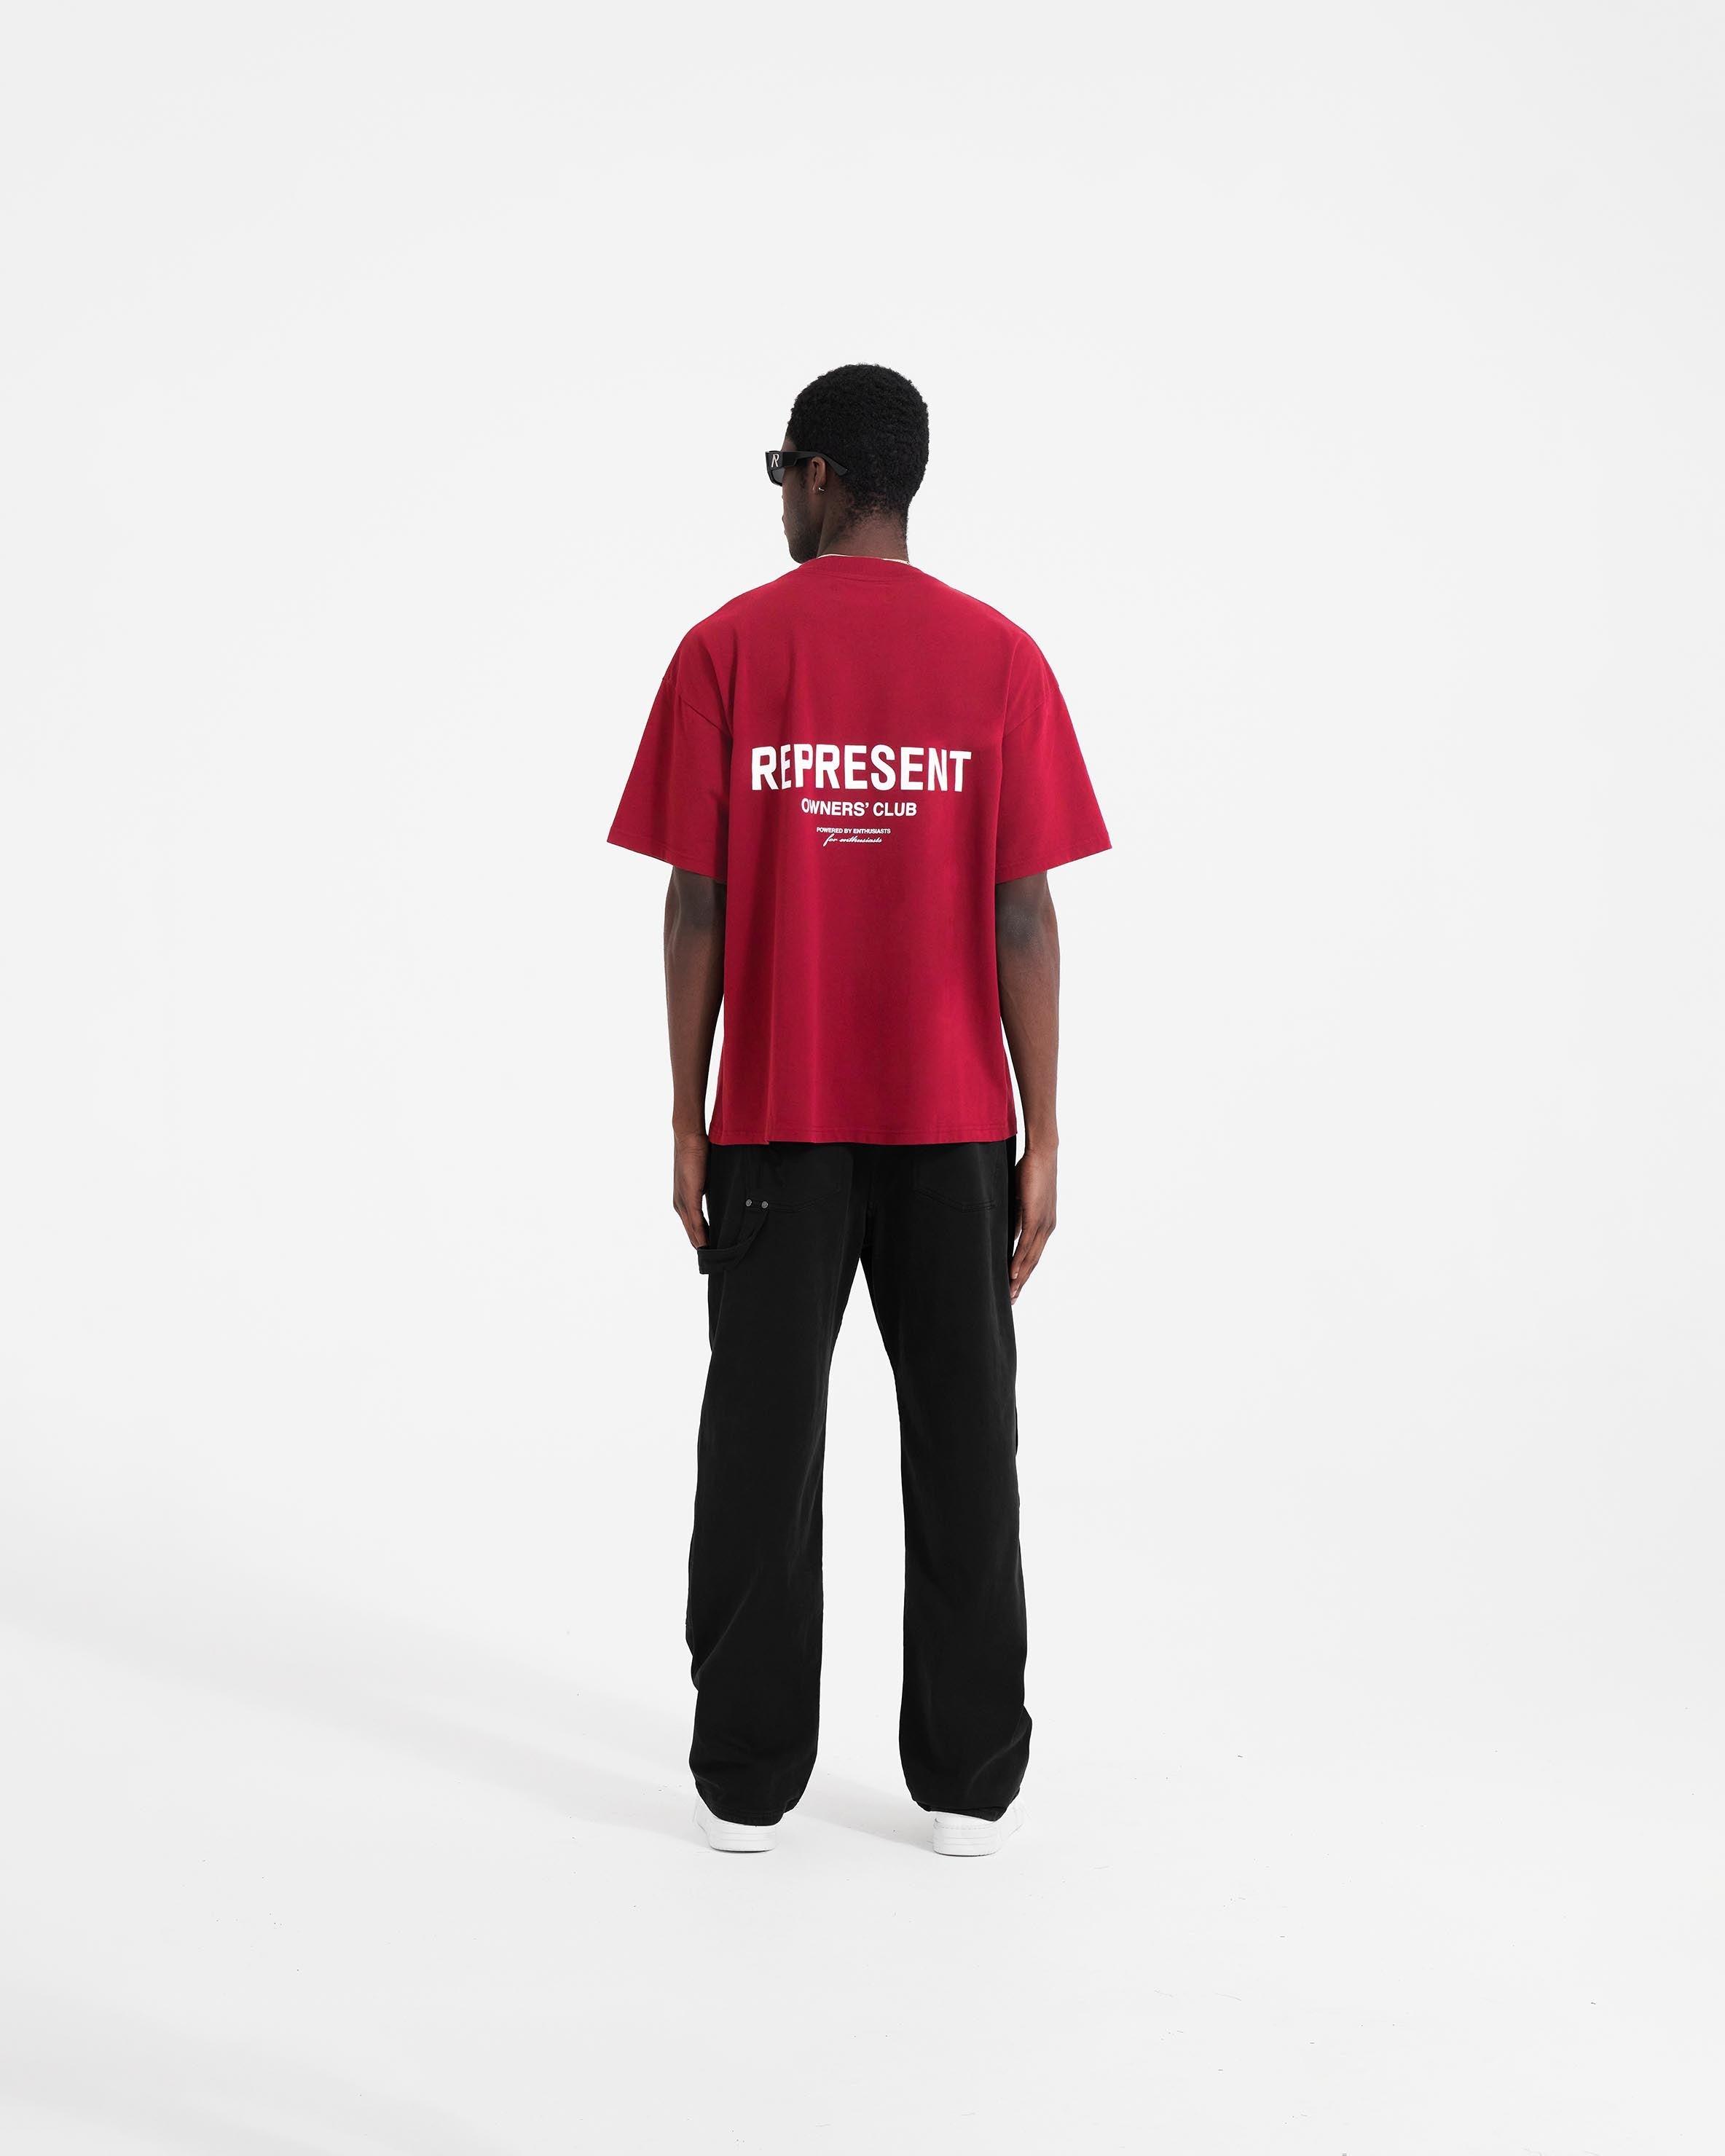 Represent Owners Club T-Shirt - Red